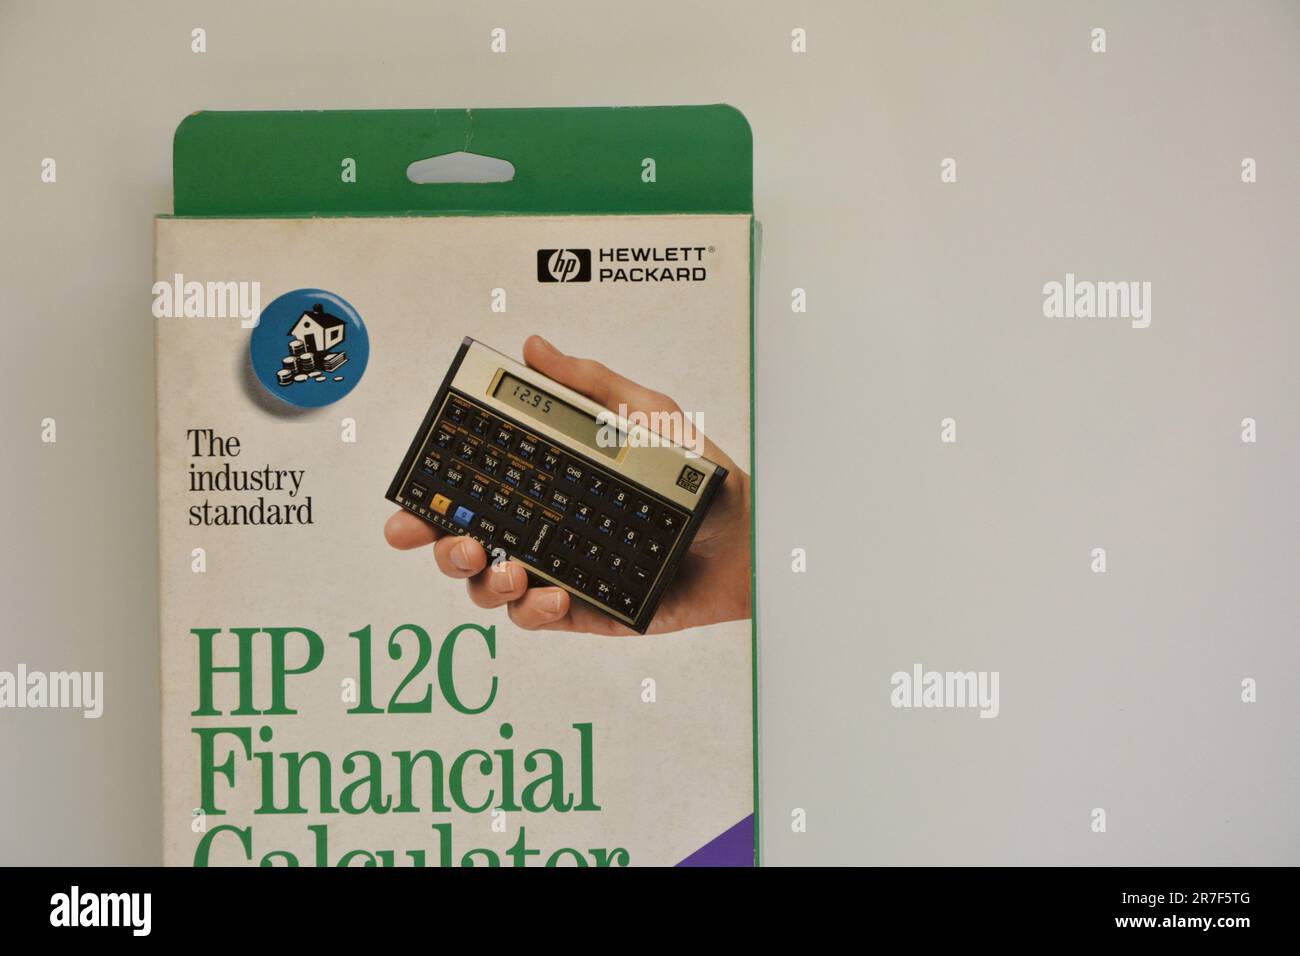 City: Marilia, São Paulo, Brazil - 17 October 2022: Packaging for the Hewlett Packard financial HP calculator in white and green colors with the compa Stock Photo